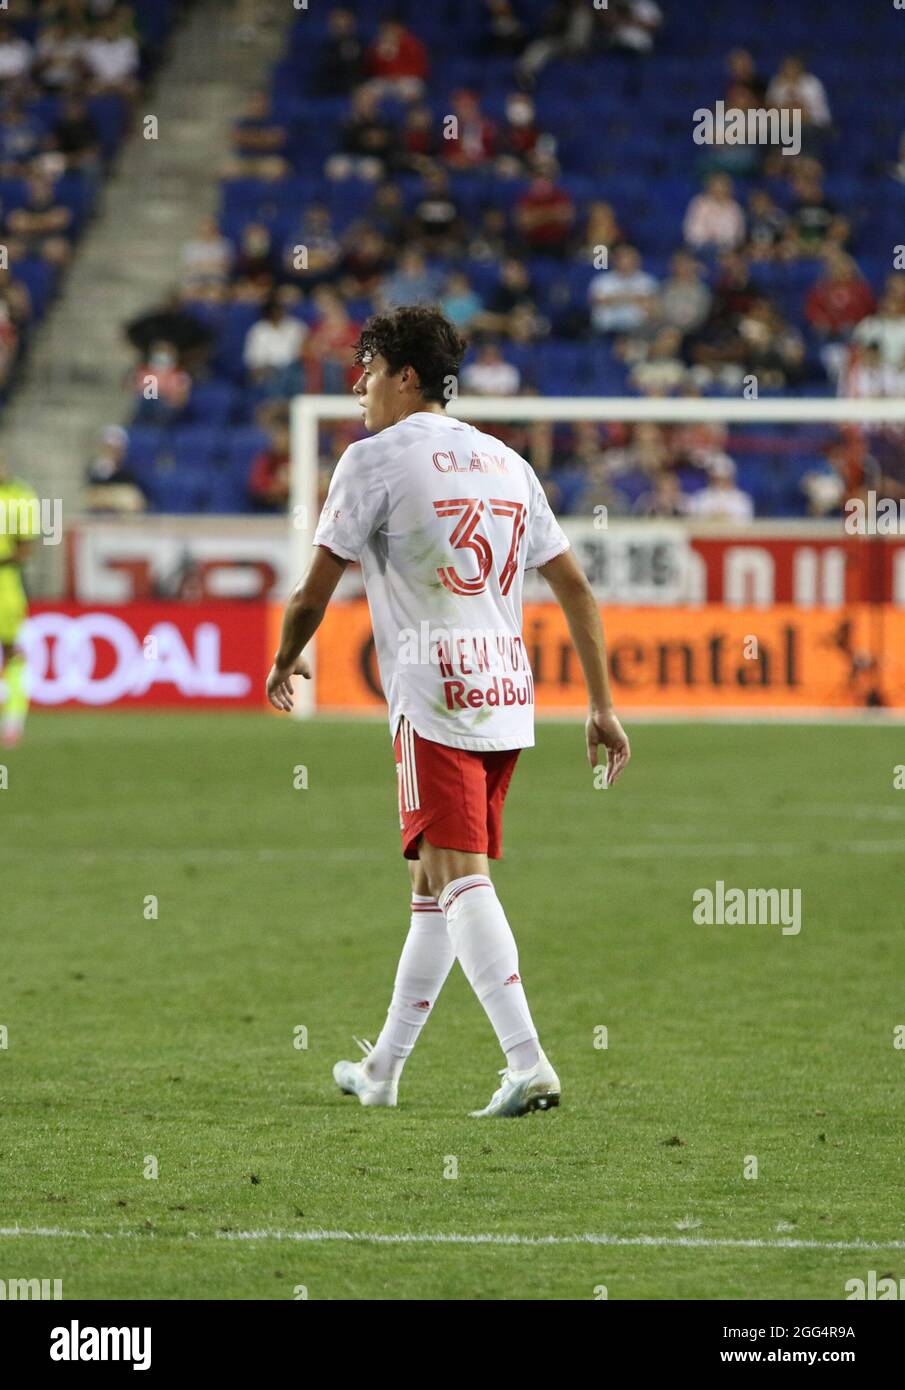 Harrison, United States . 28th Aug, 2021. Caden Clark (37, NY Red Bulls) during the Major League Soccer game between New York Red Bulls and Chicago Fire FC at Red Bull Arena in Harrison, New Jersey. Credit: SPP Sport Press Photo. /Alamy Live News Stock Photo